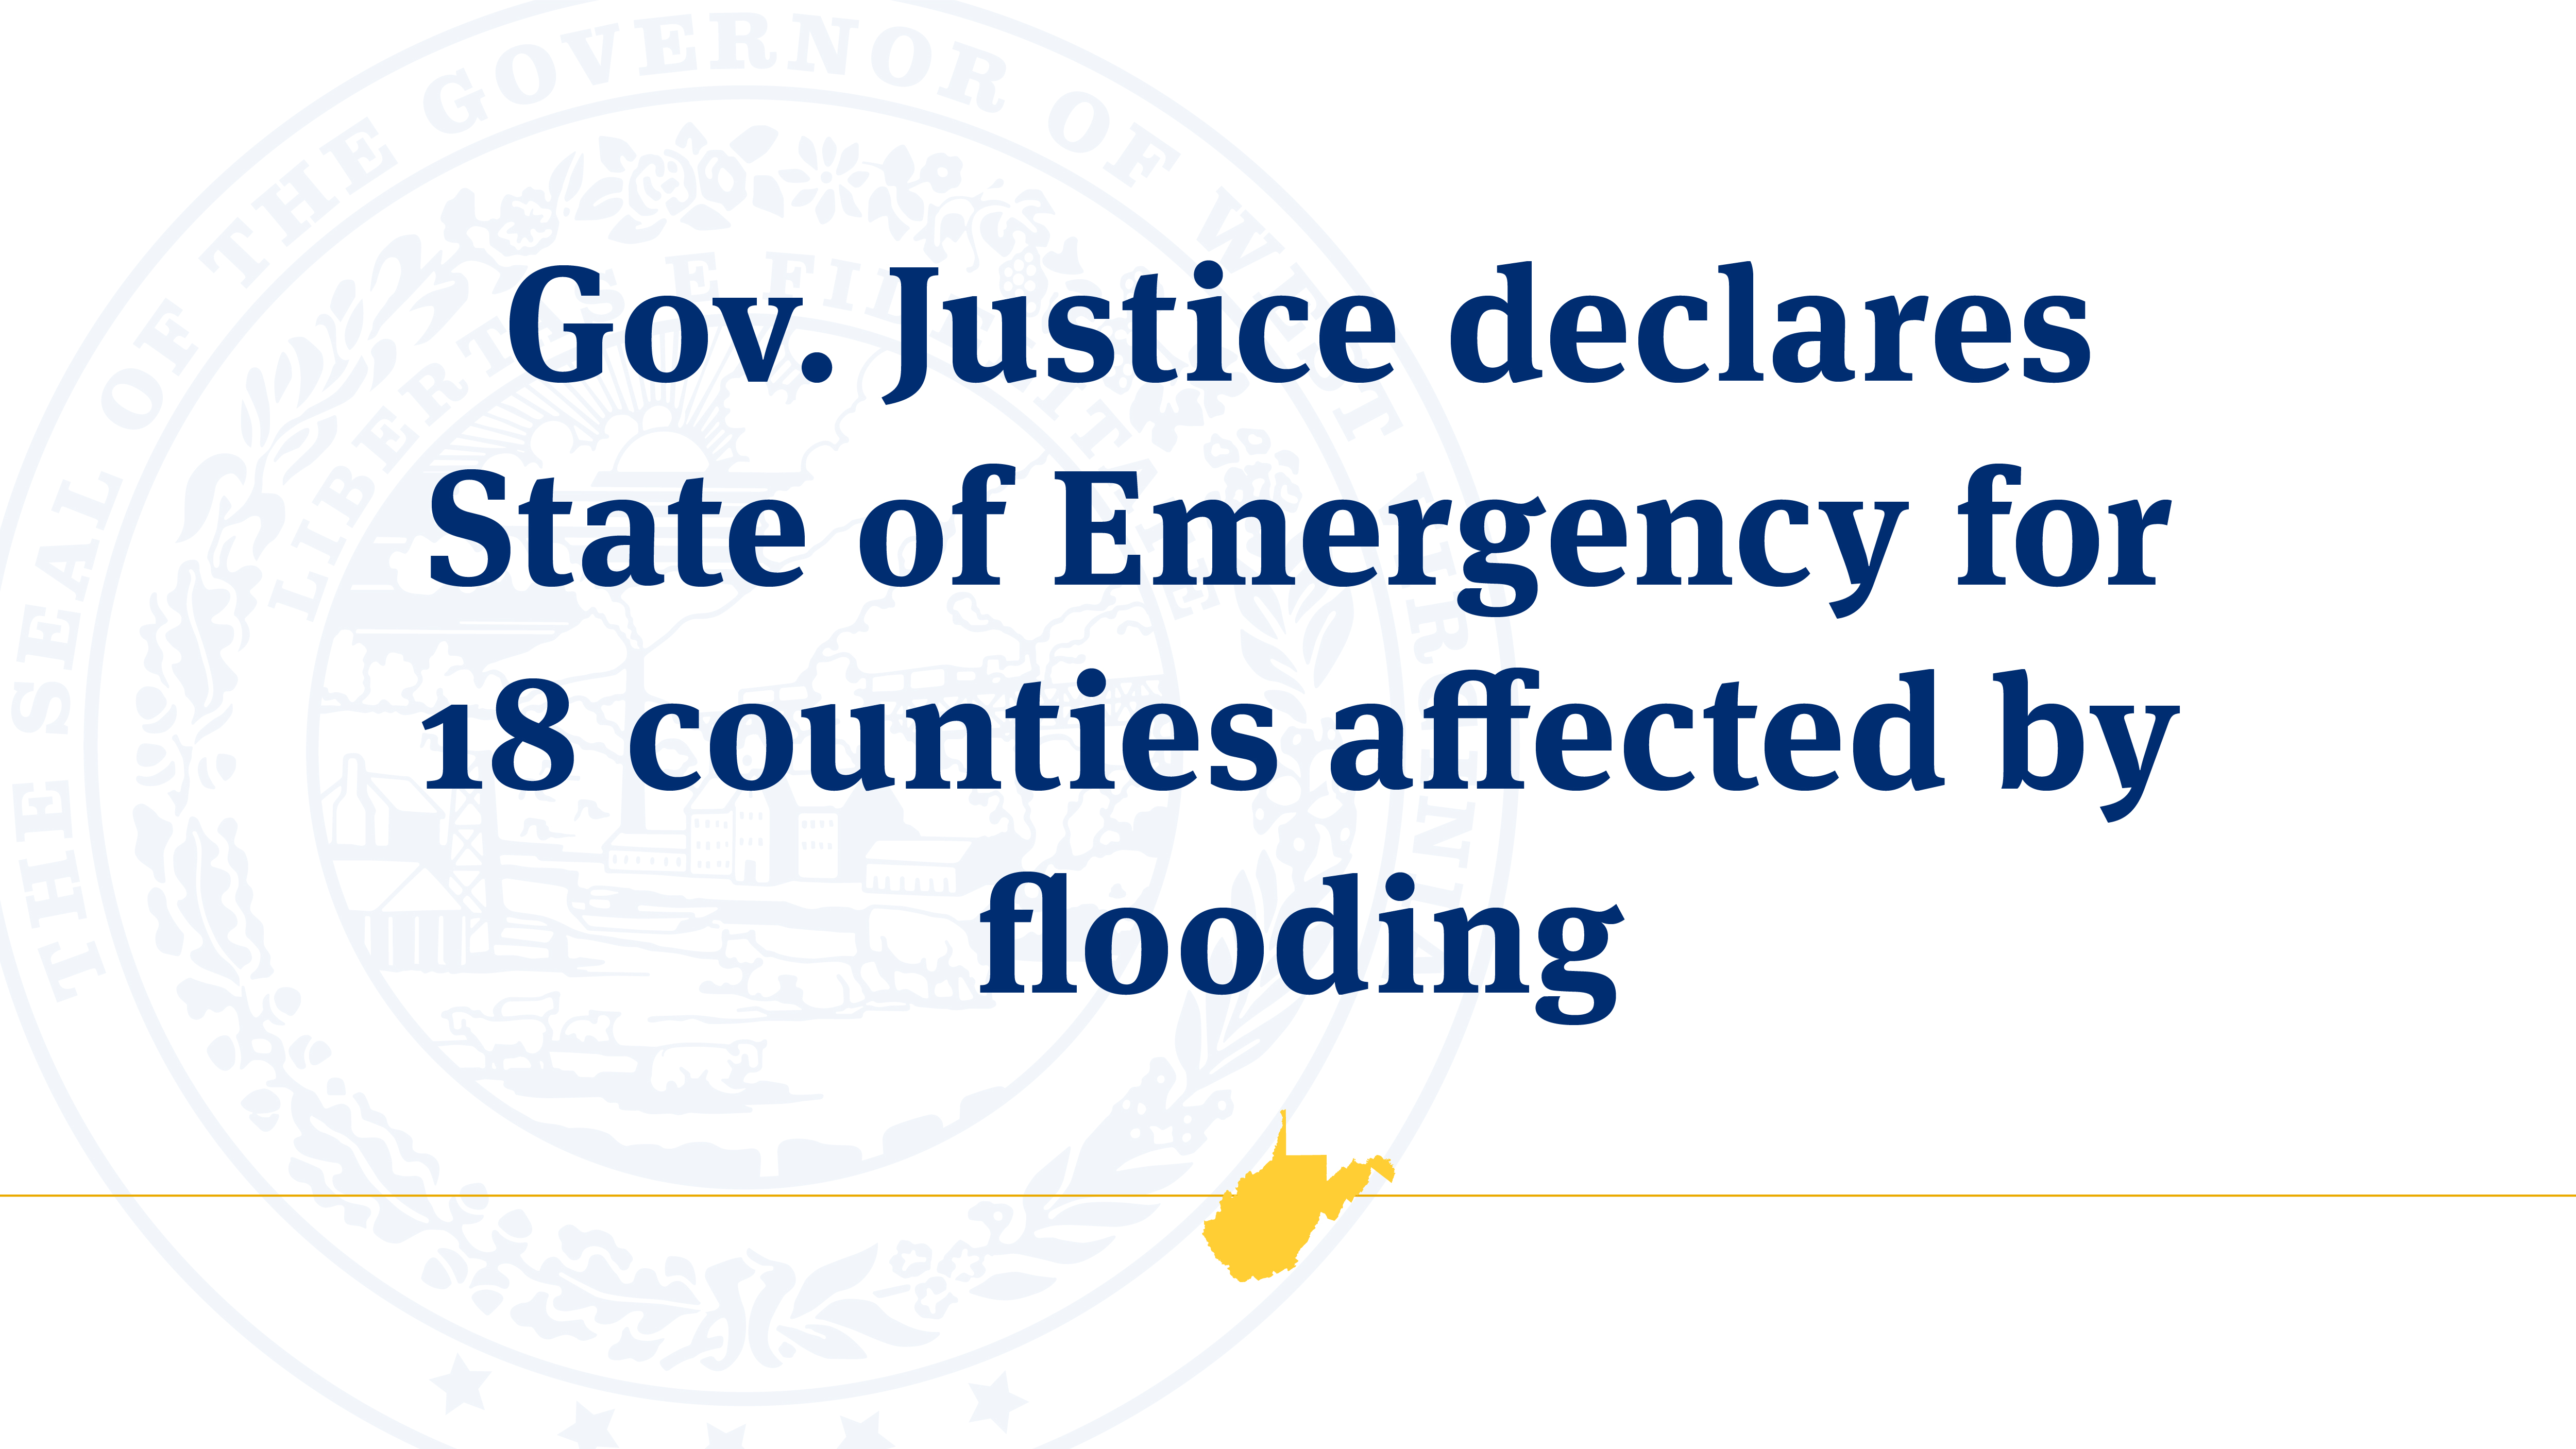 Gov. Justice declares State of Emergency for 18 counties affected by